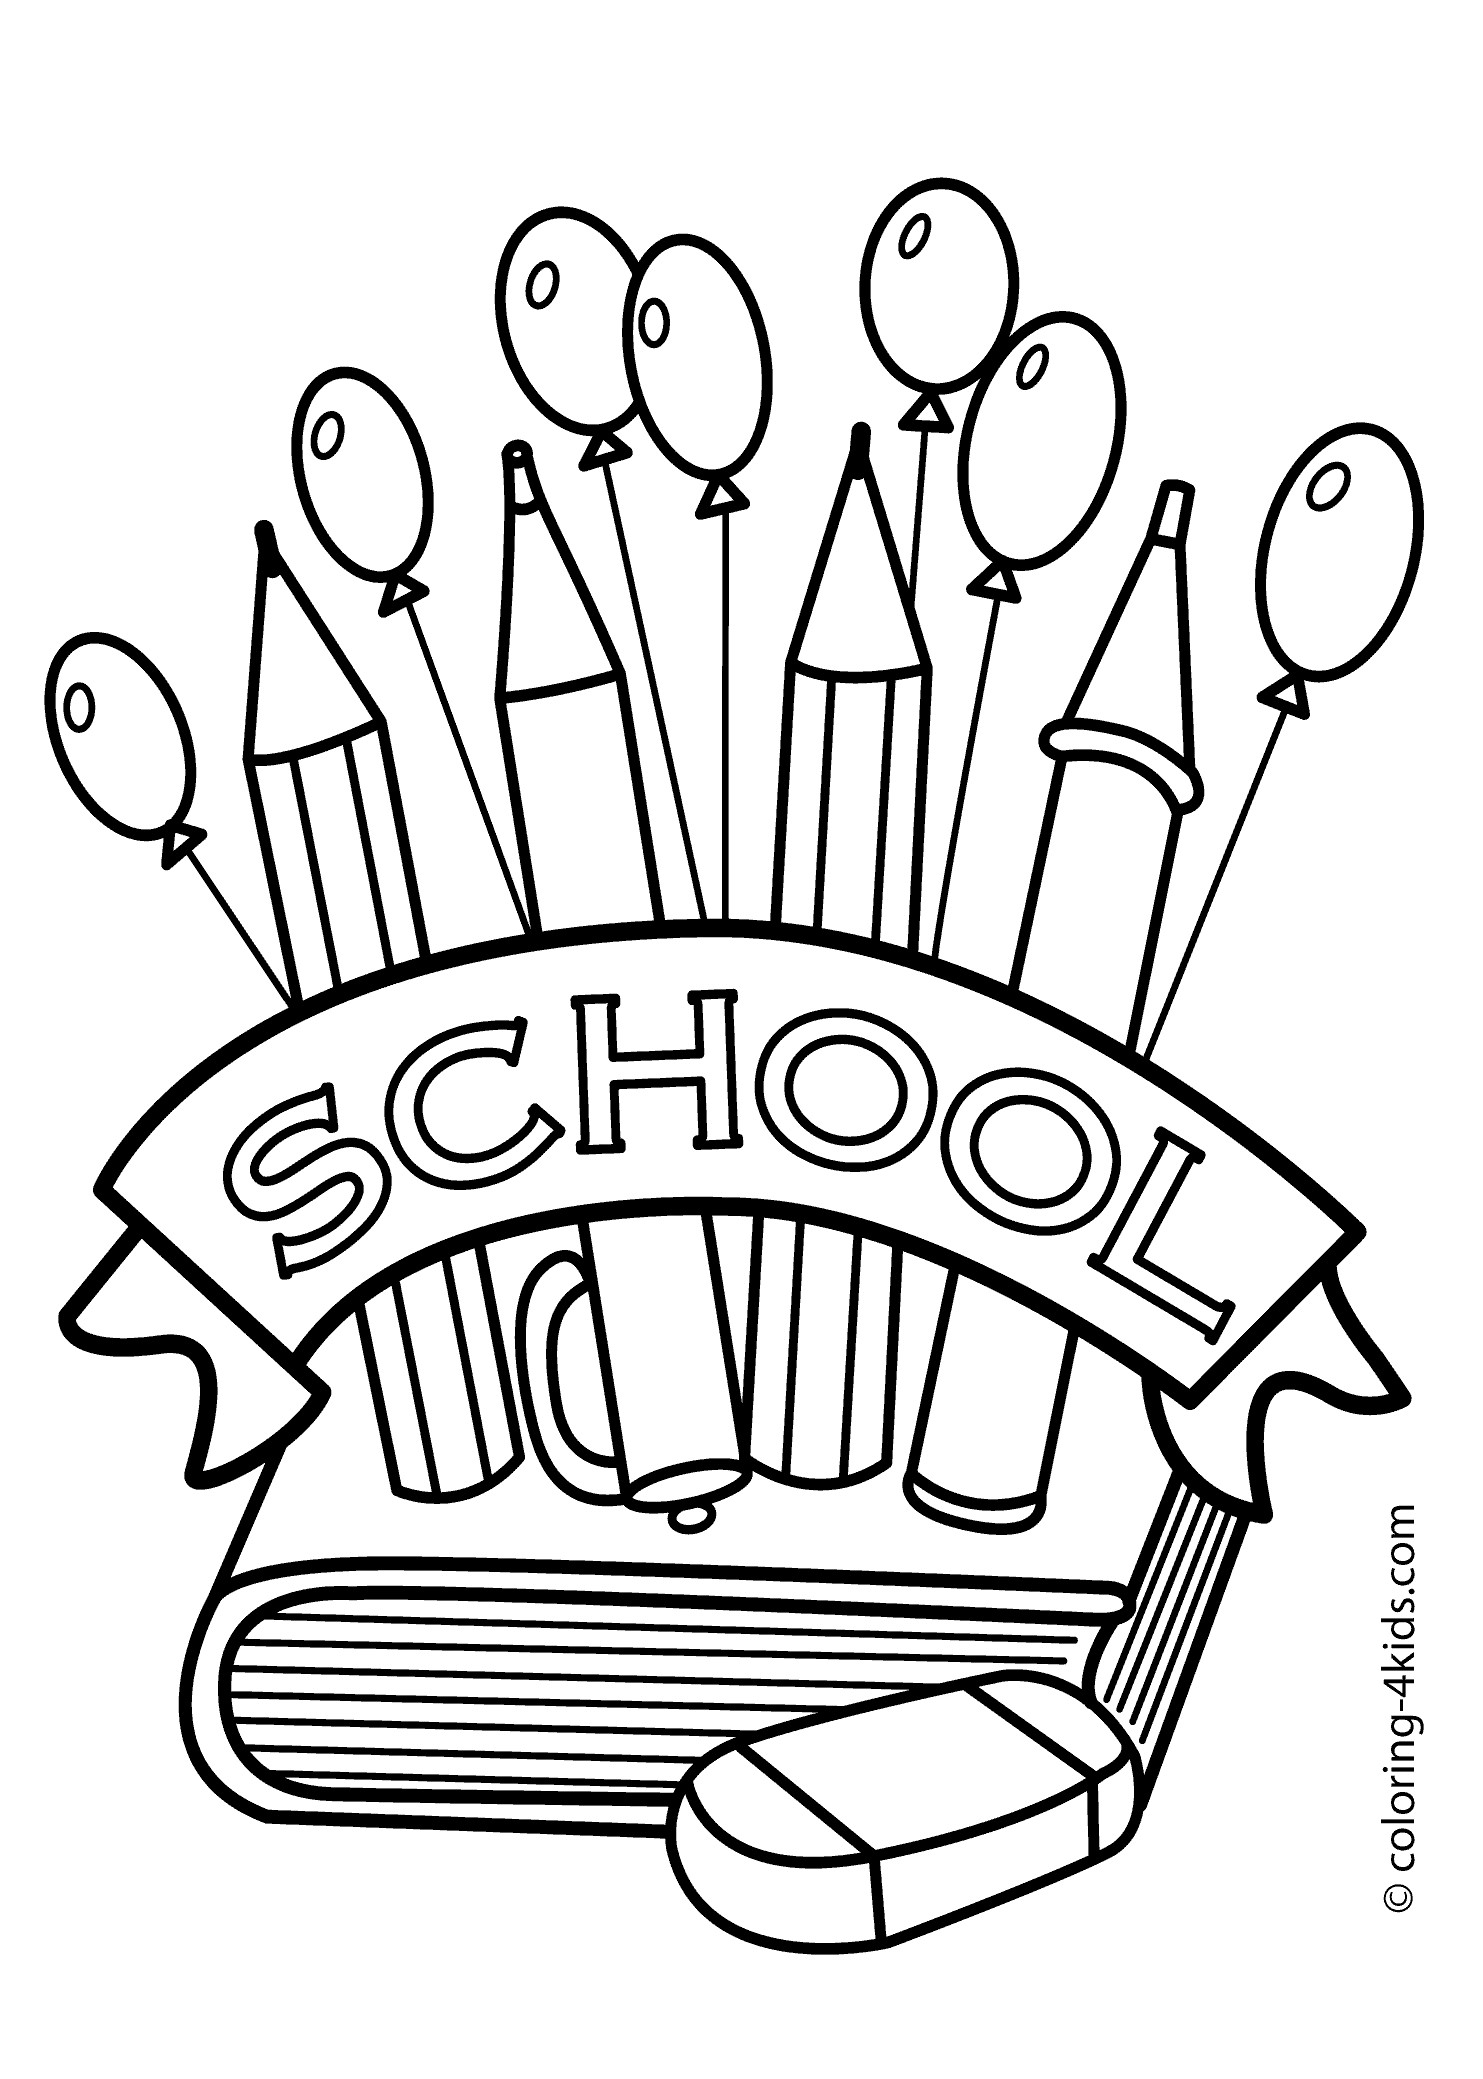 School Coloring Pages Printable
 Back to the School coloring page classes coloring page